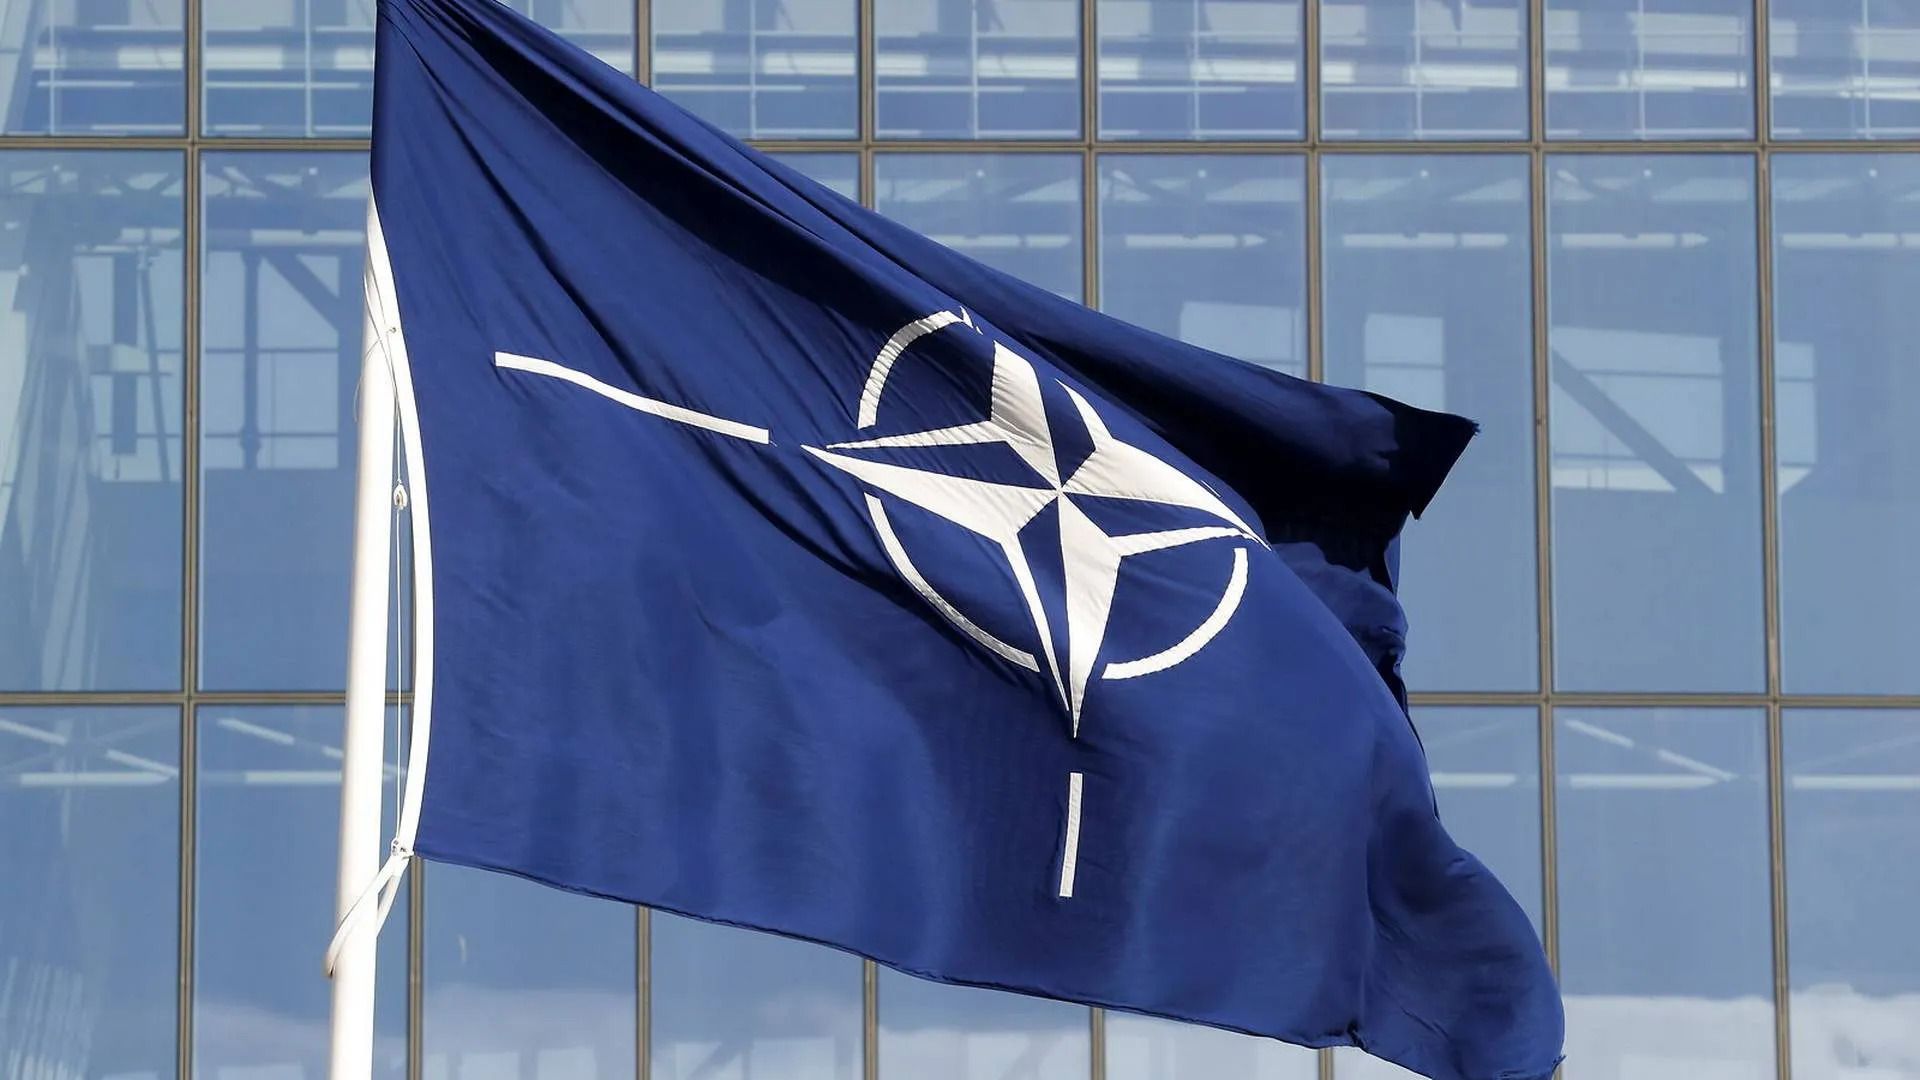 NATO to strengthen cooperation with Asia-Pacific region countries